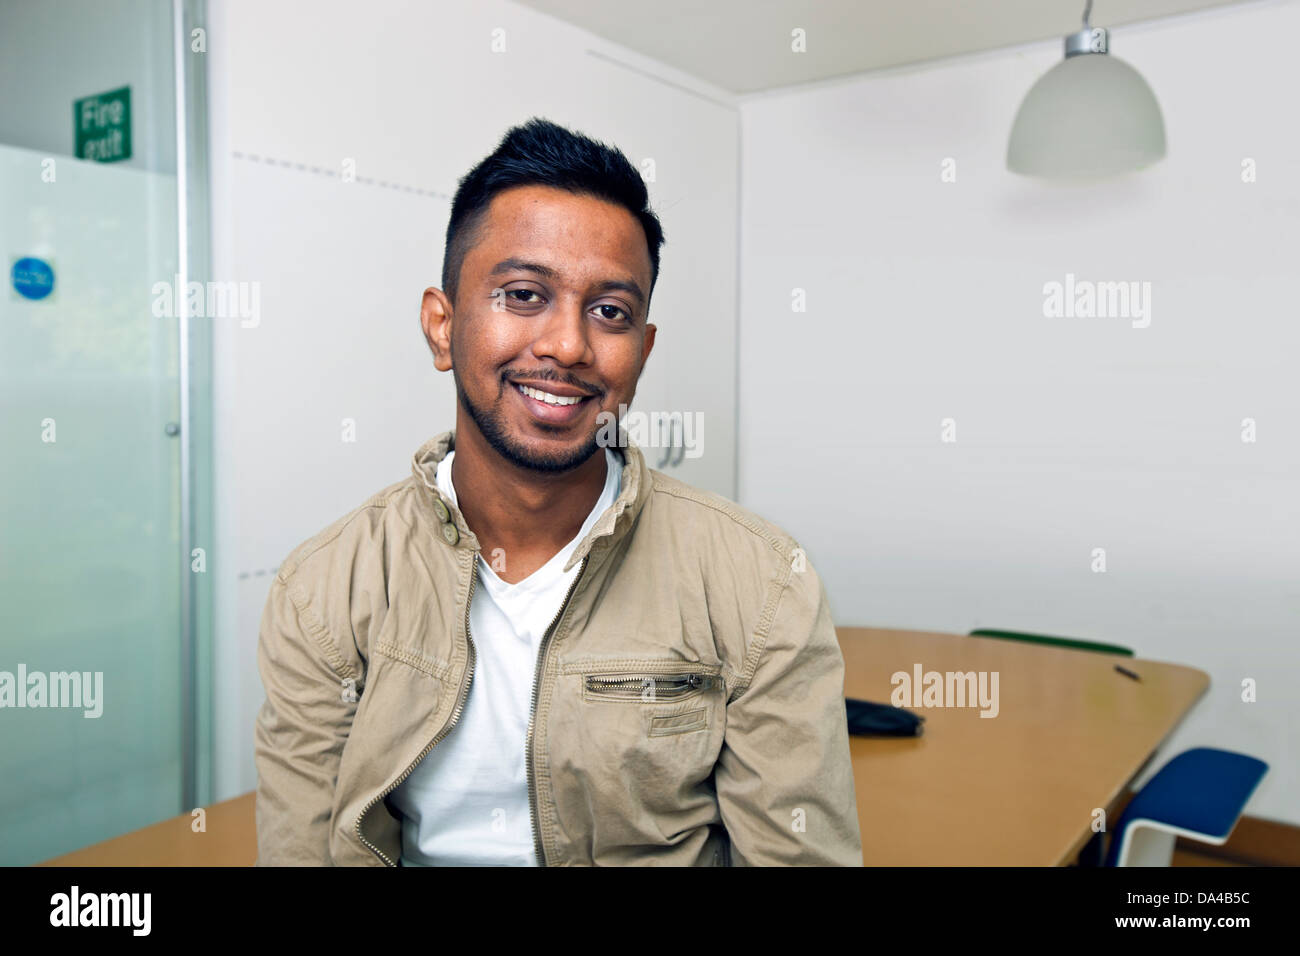 Young Indian man smiling at camera in his office Stock Photo